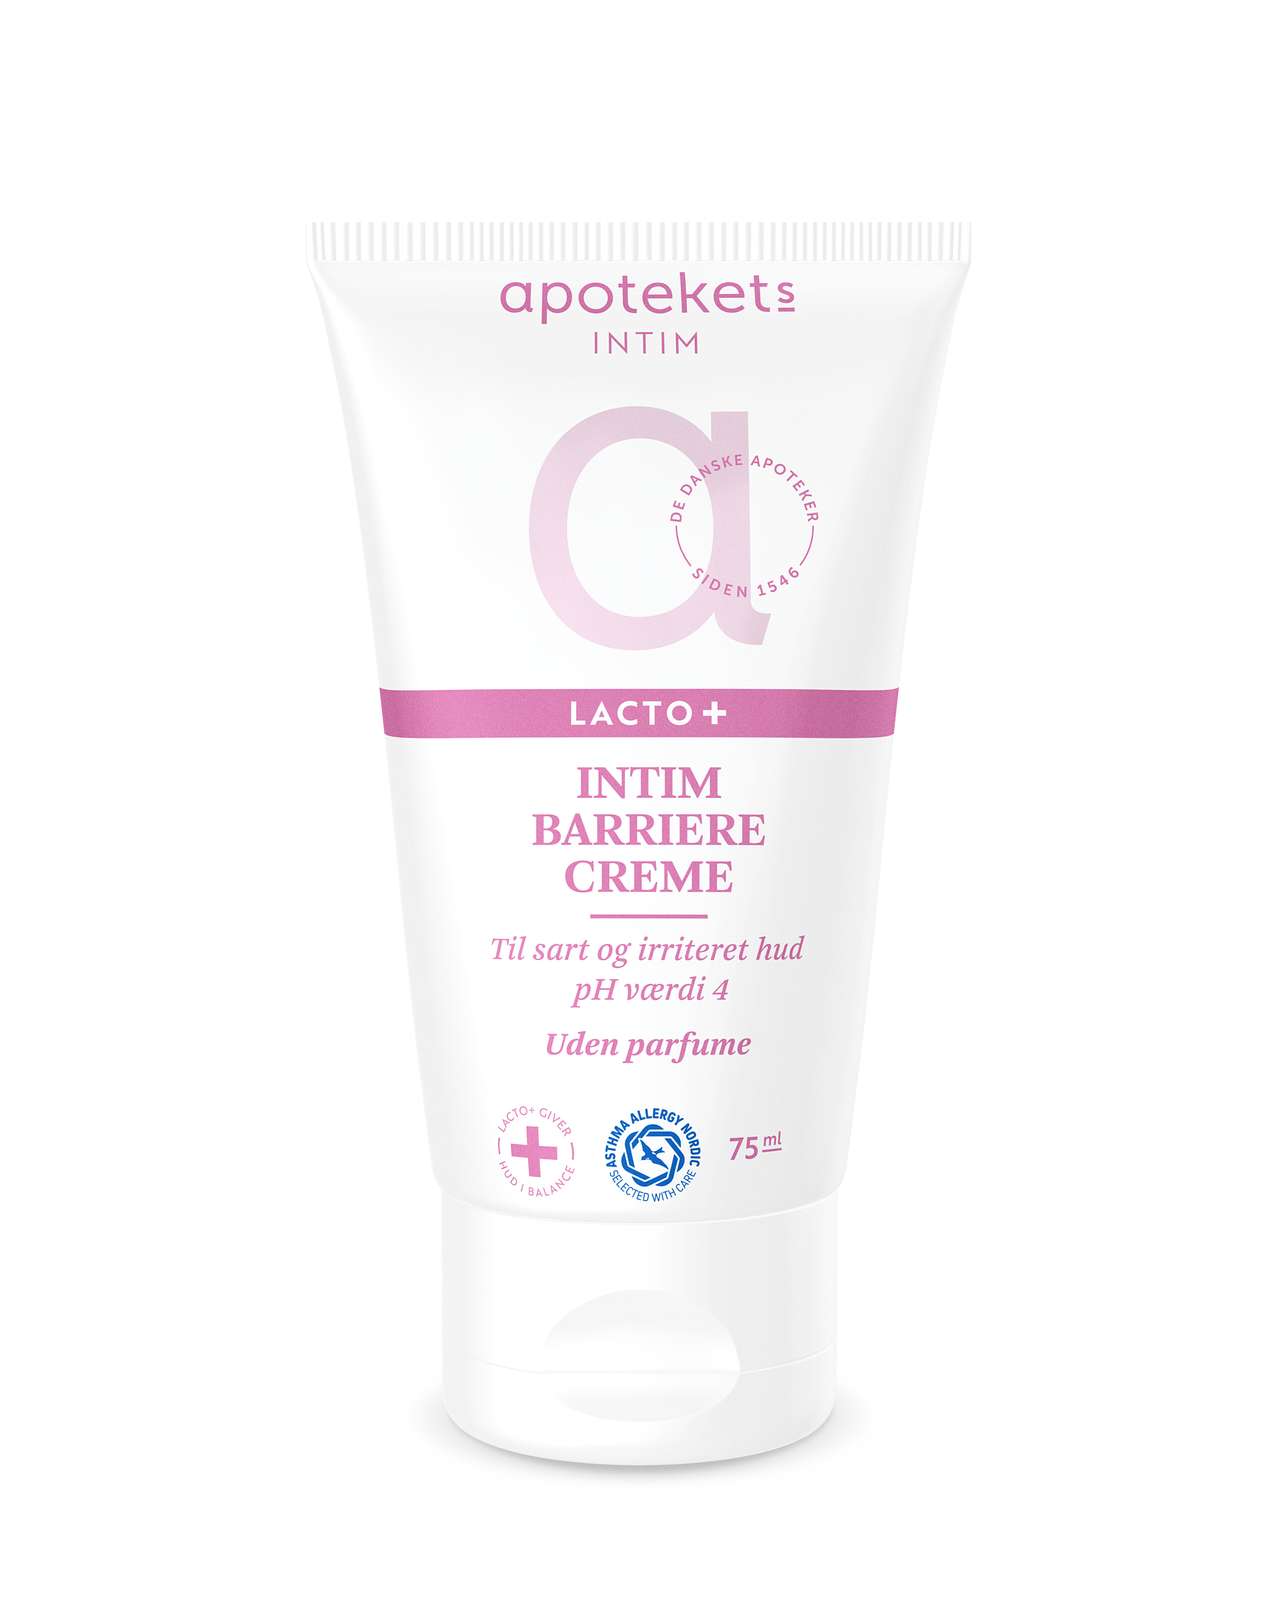 224383 apotekets intimbarriere creme 75 ml RGB highres